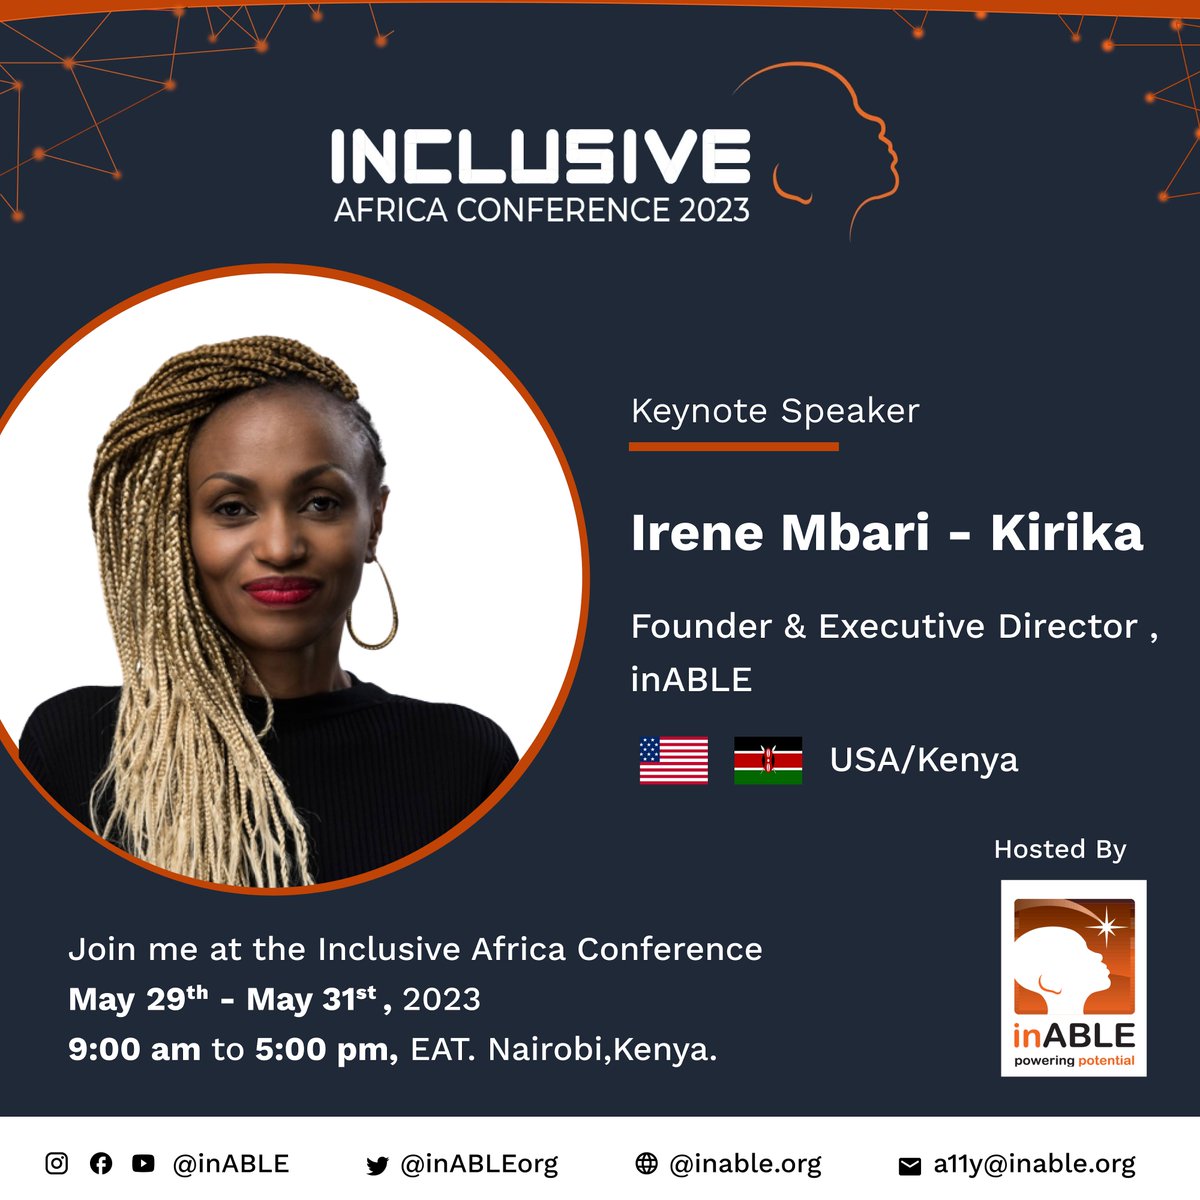 I'll be speaking during the Inclusive Africa Conference 2023 hosted by @inABLEorg as we take digital accessibility and assistive technology to the next level in Africa. I'd love for you to join the conversation by registering now - hopin.com/events/inclusi… #InclusiveAfrica2023